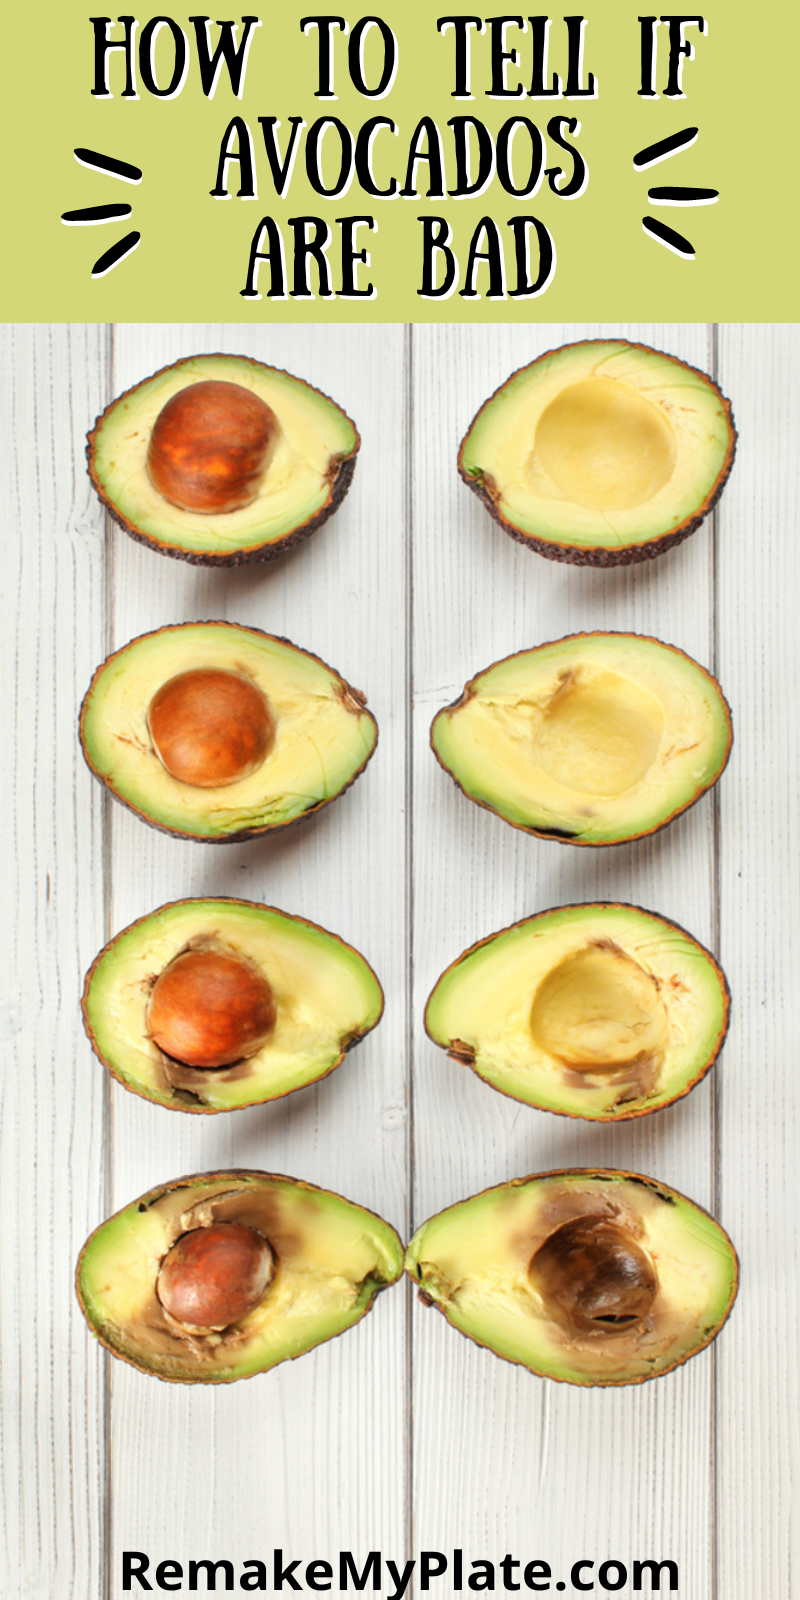 pinterest pin on ripe vs unripe avocados and how to tell if they are bad